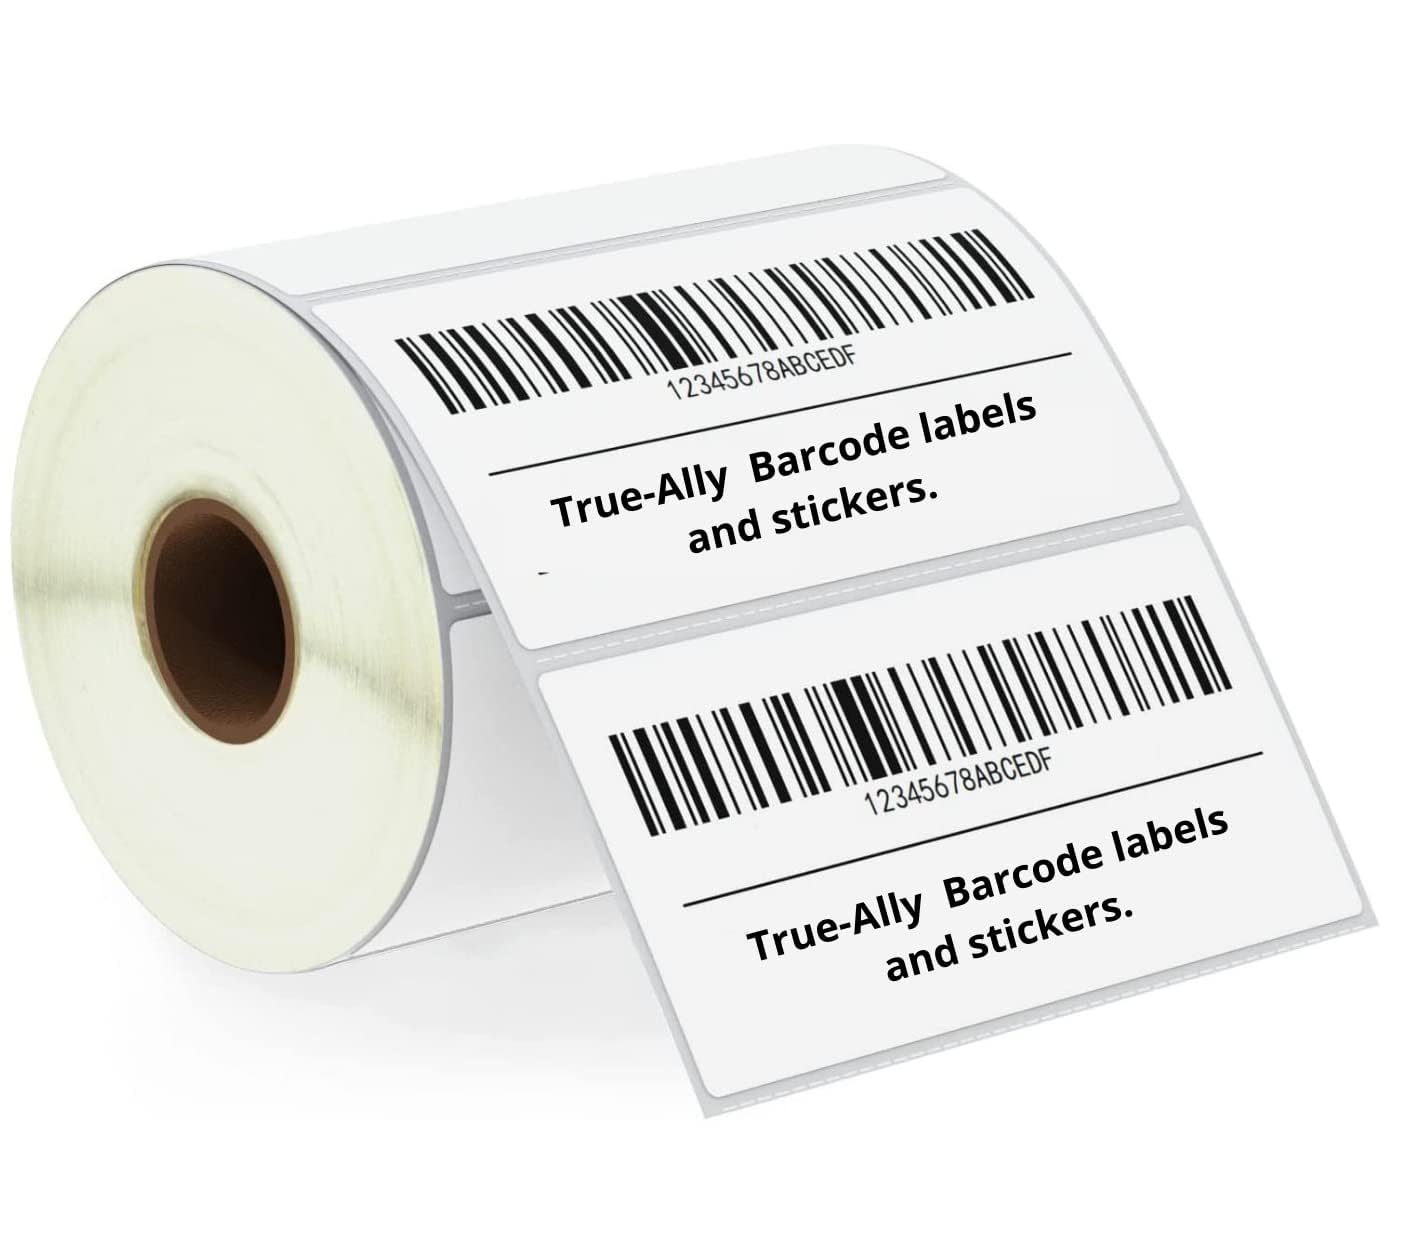 KIYA 100X75 Barcode Label Sticker  - 100mm x 75mm - 1 Ups - 250 Labels Per Roll - White Self Adhesive Sticker for Printing Barcoding (1 Roll Per Pack (250 Labels))